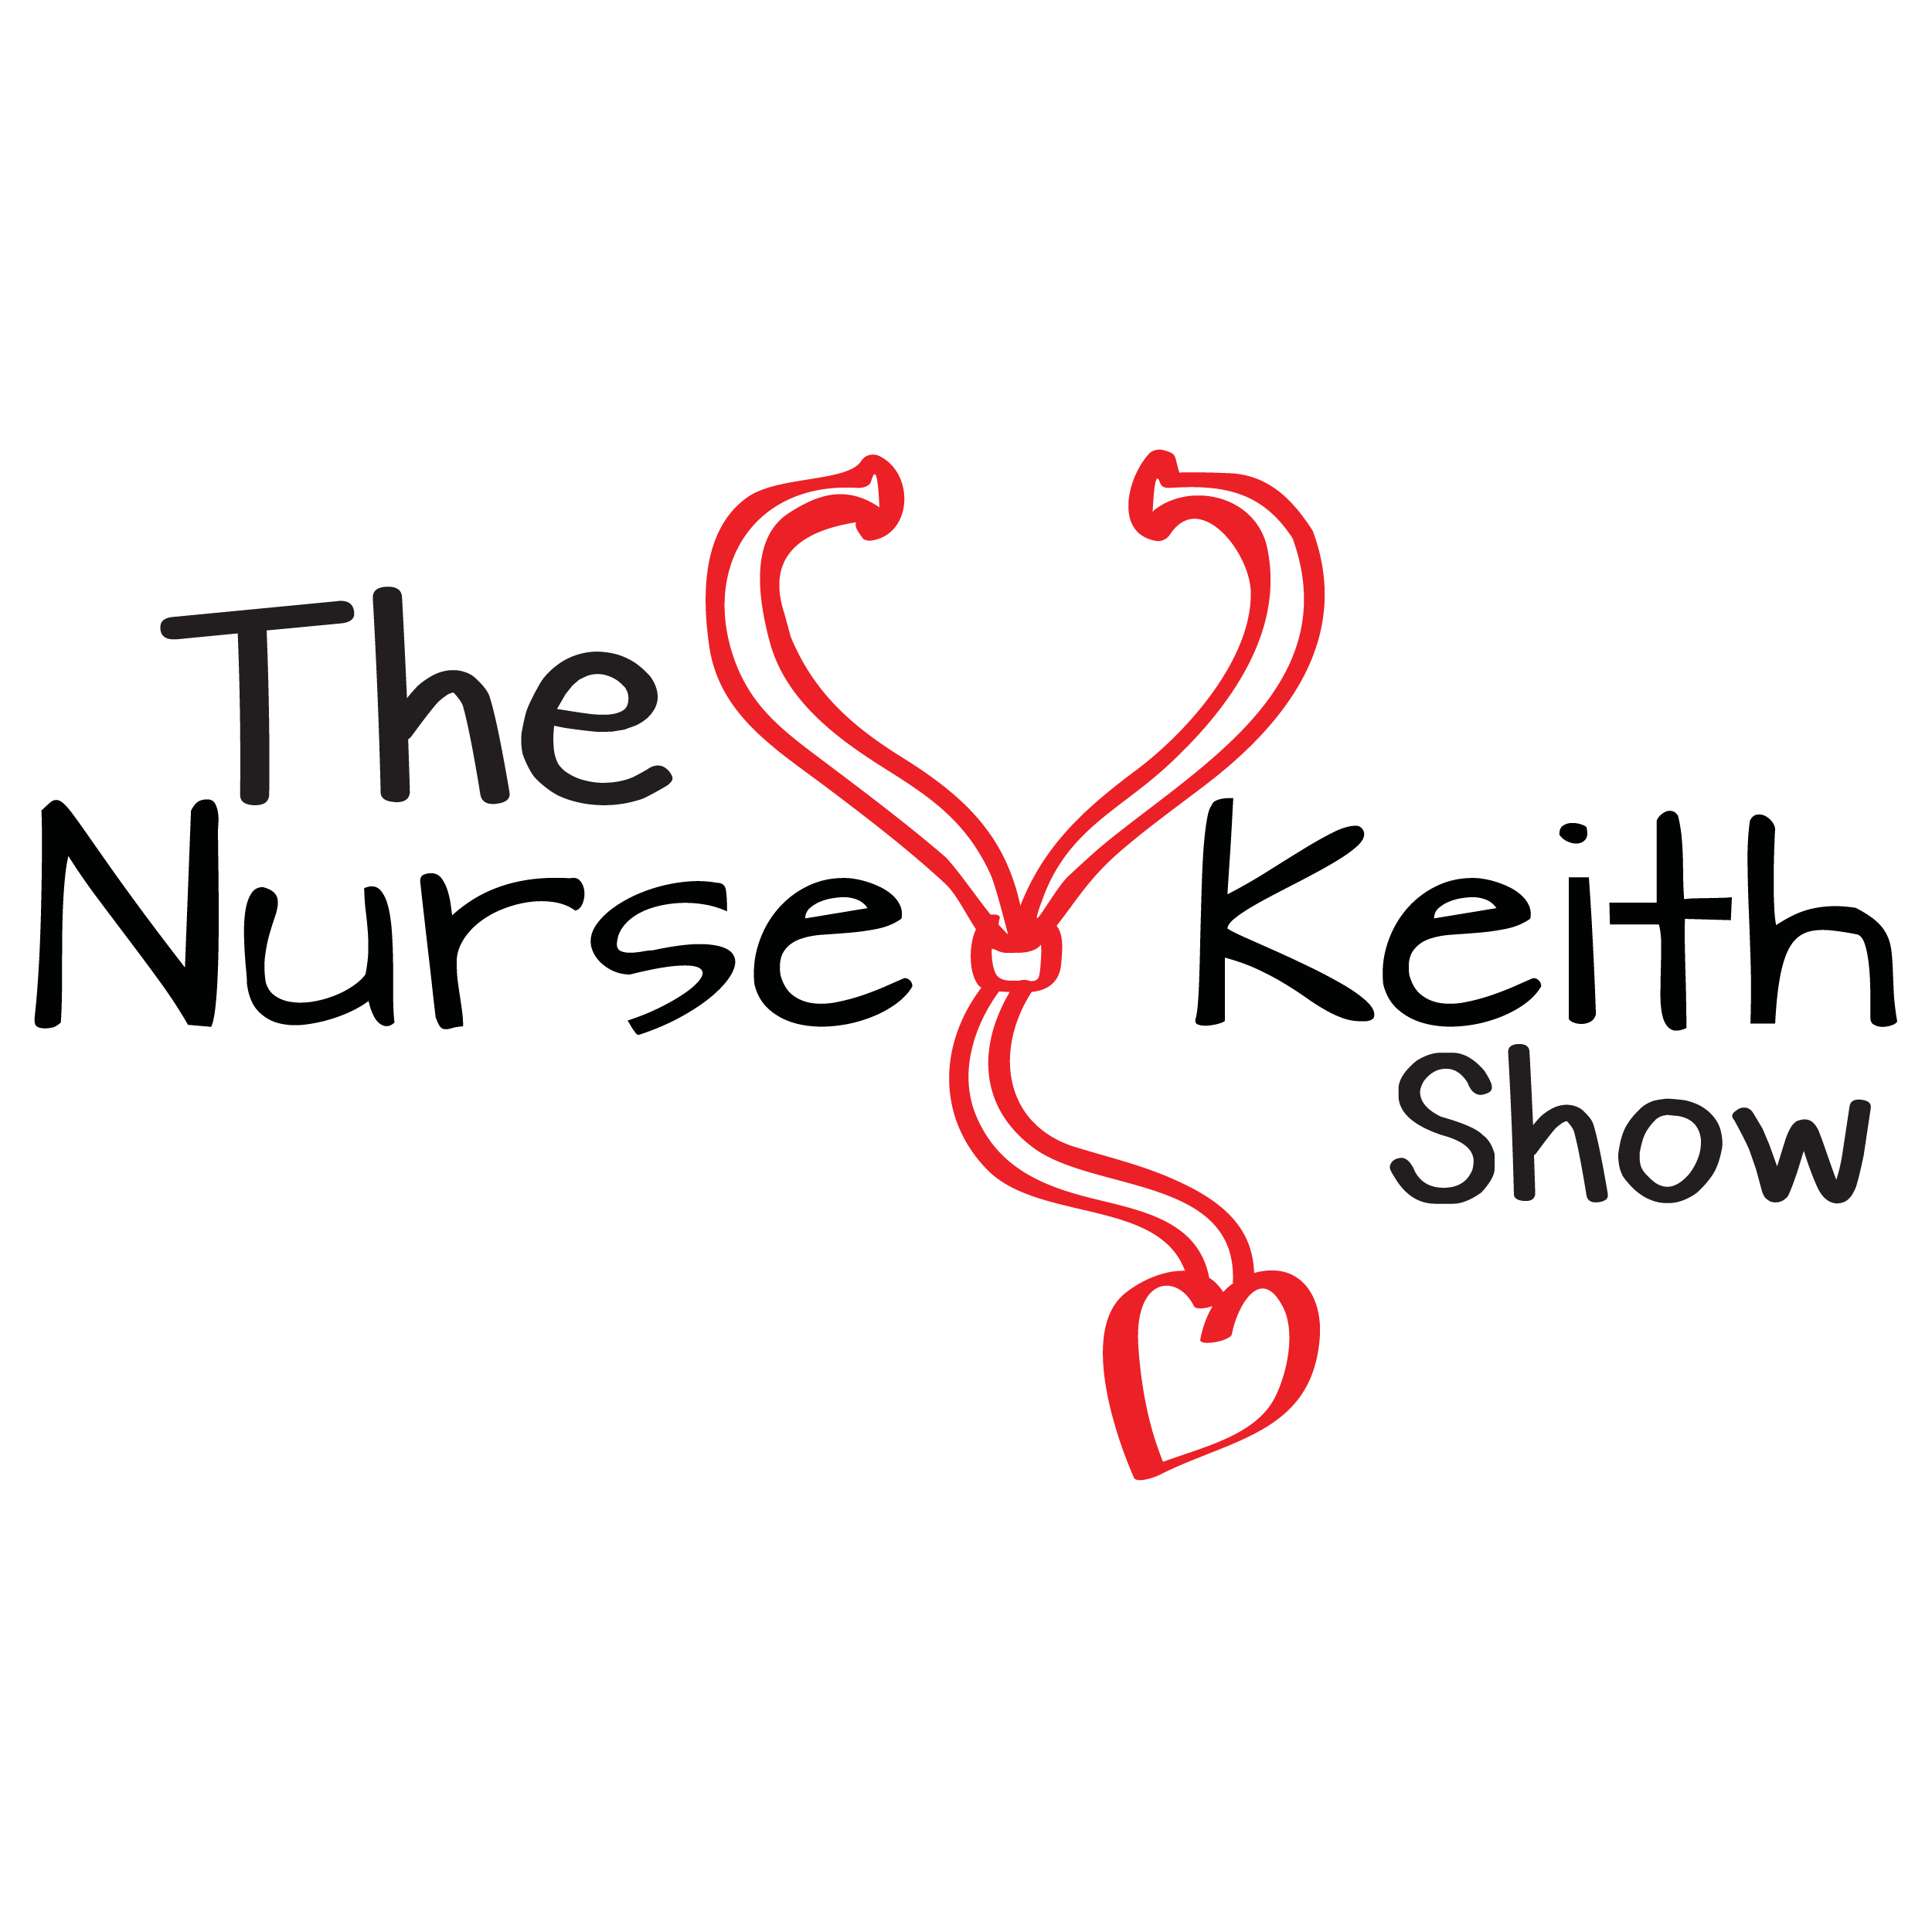 Nursing: Should You Stay or Should You Go? | The Nurse Keith Show, EPS 270